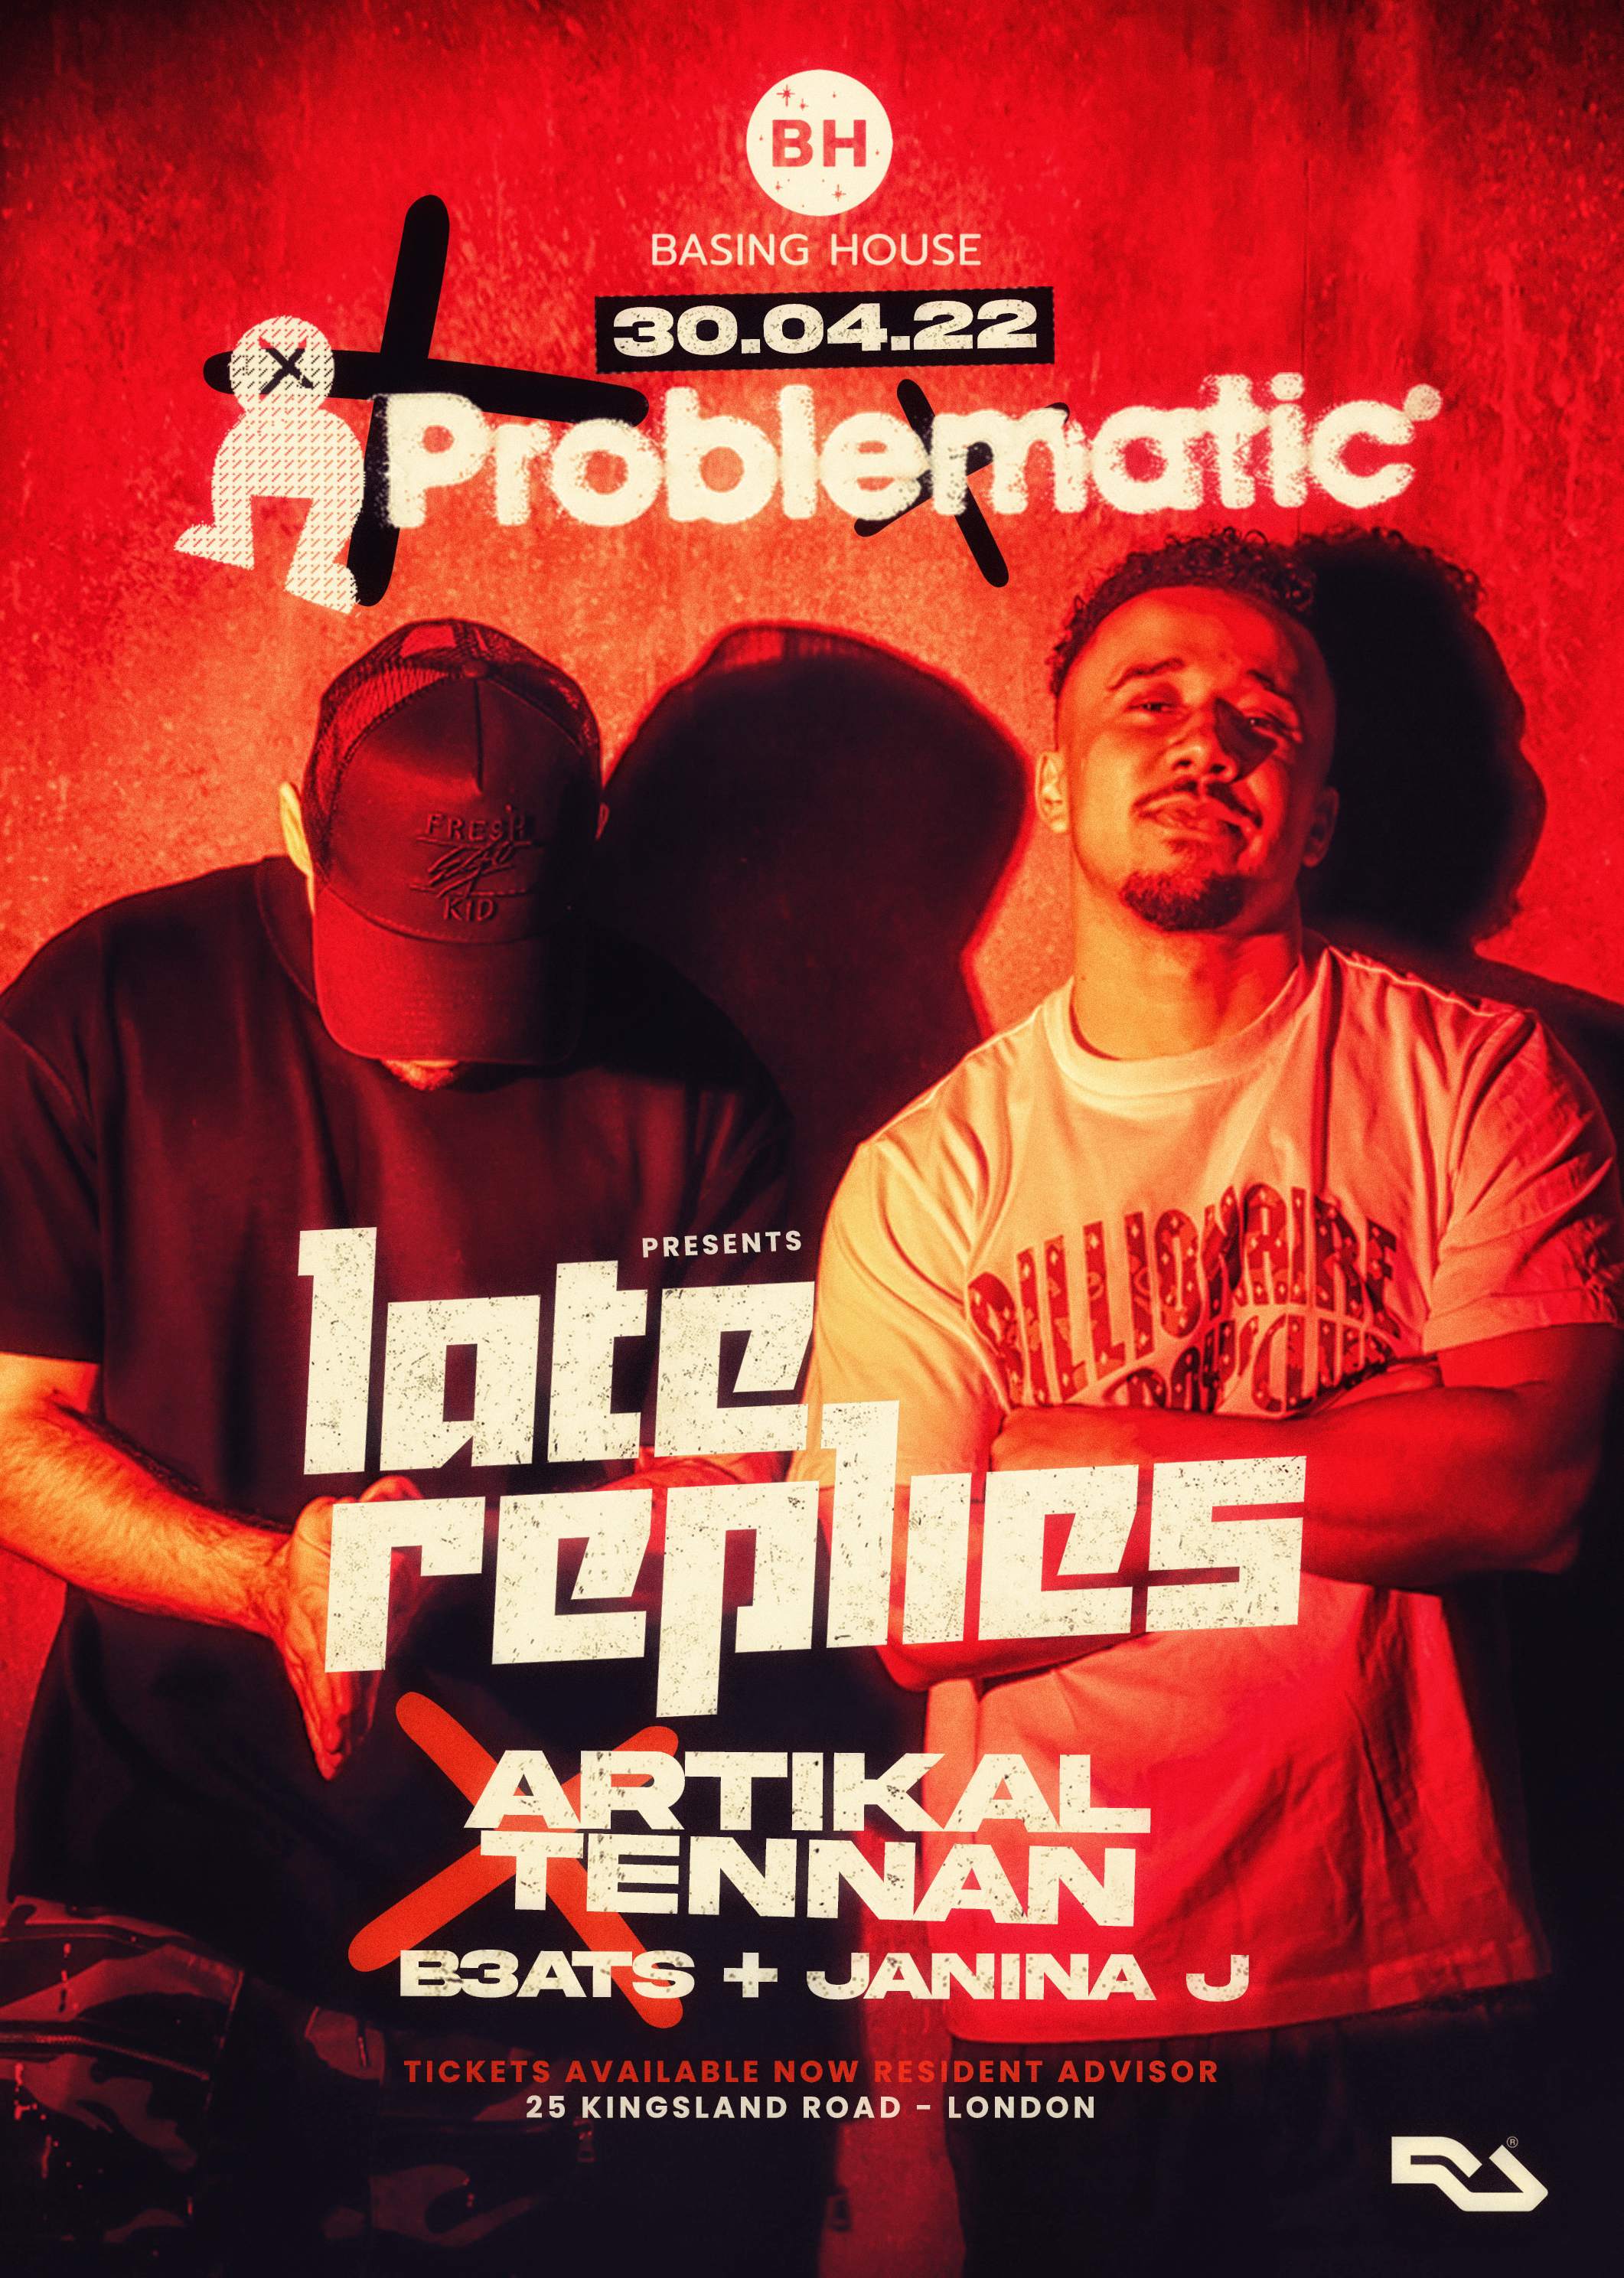 Problematic feat. Late Replies, Artikal and Tennan - Página frontal